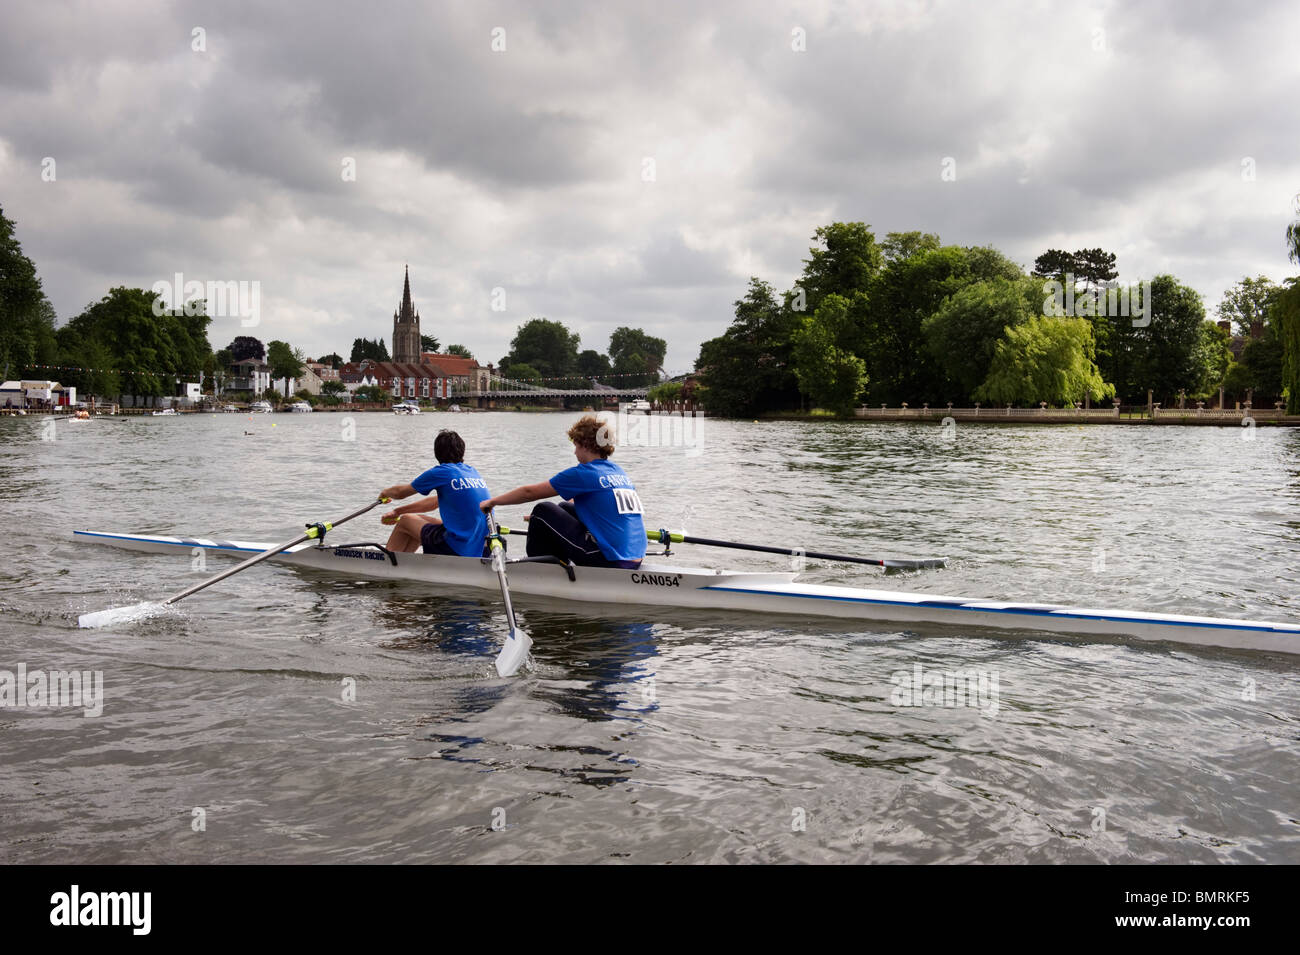 Two rowers rowing a skiff on the River Thames during Marlow town festival regatta Stock Photo